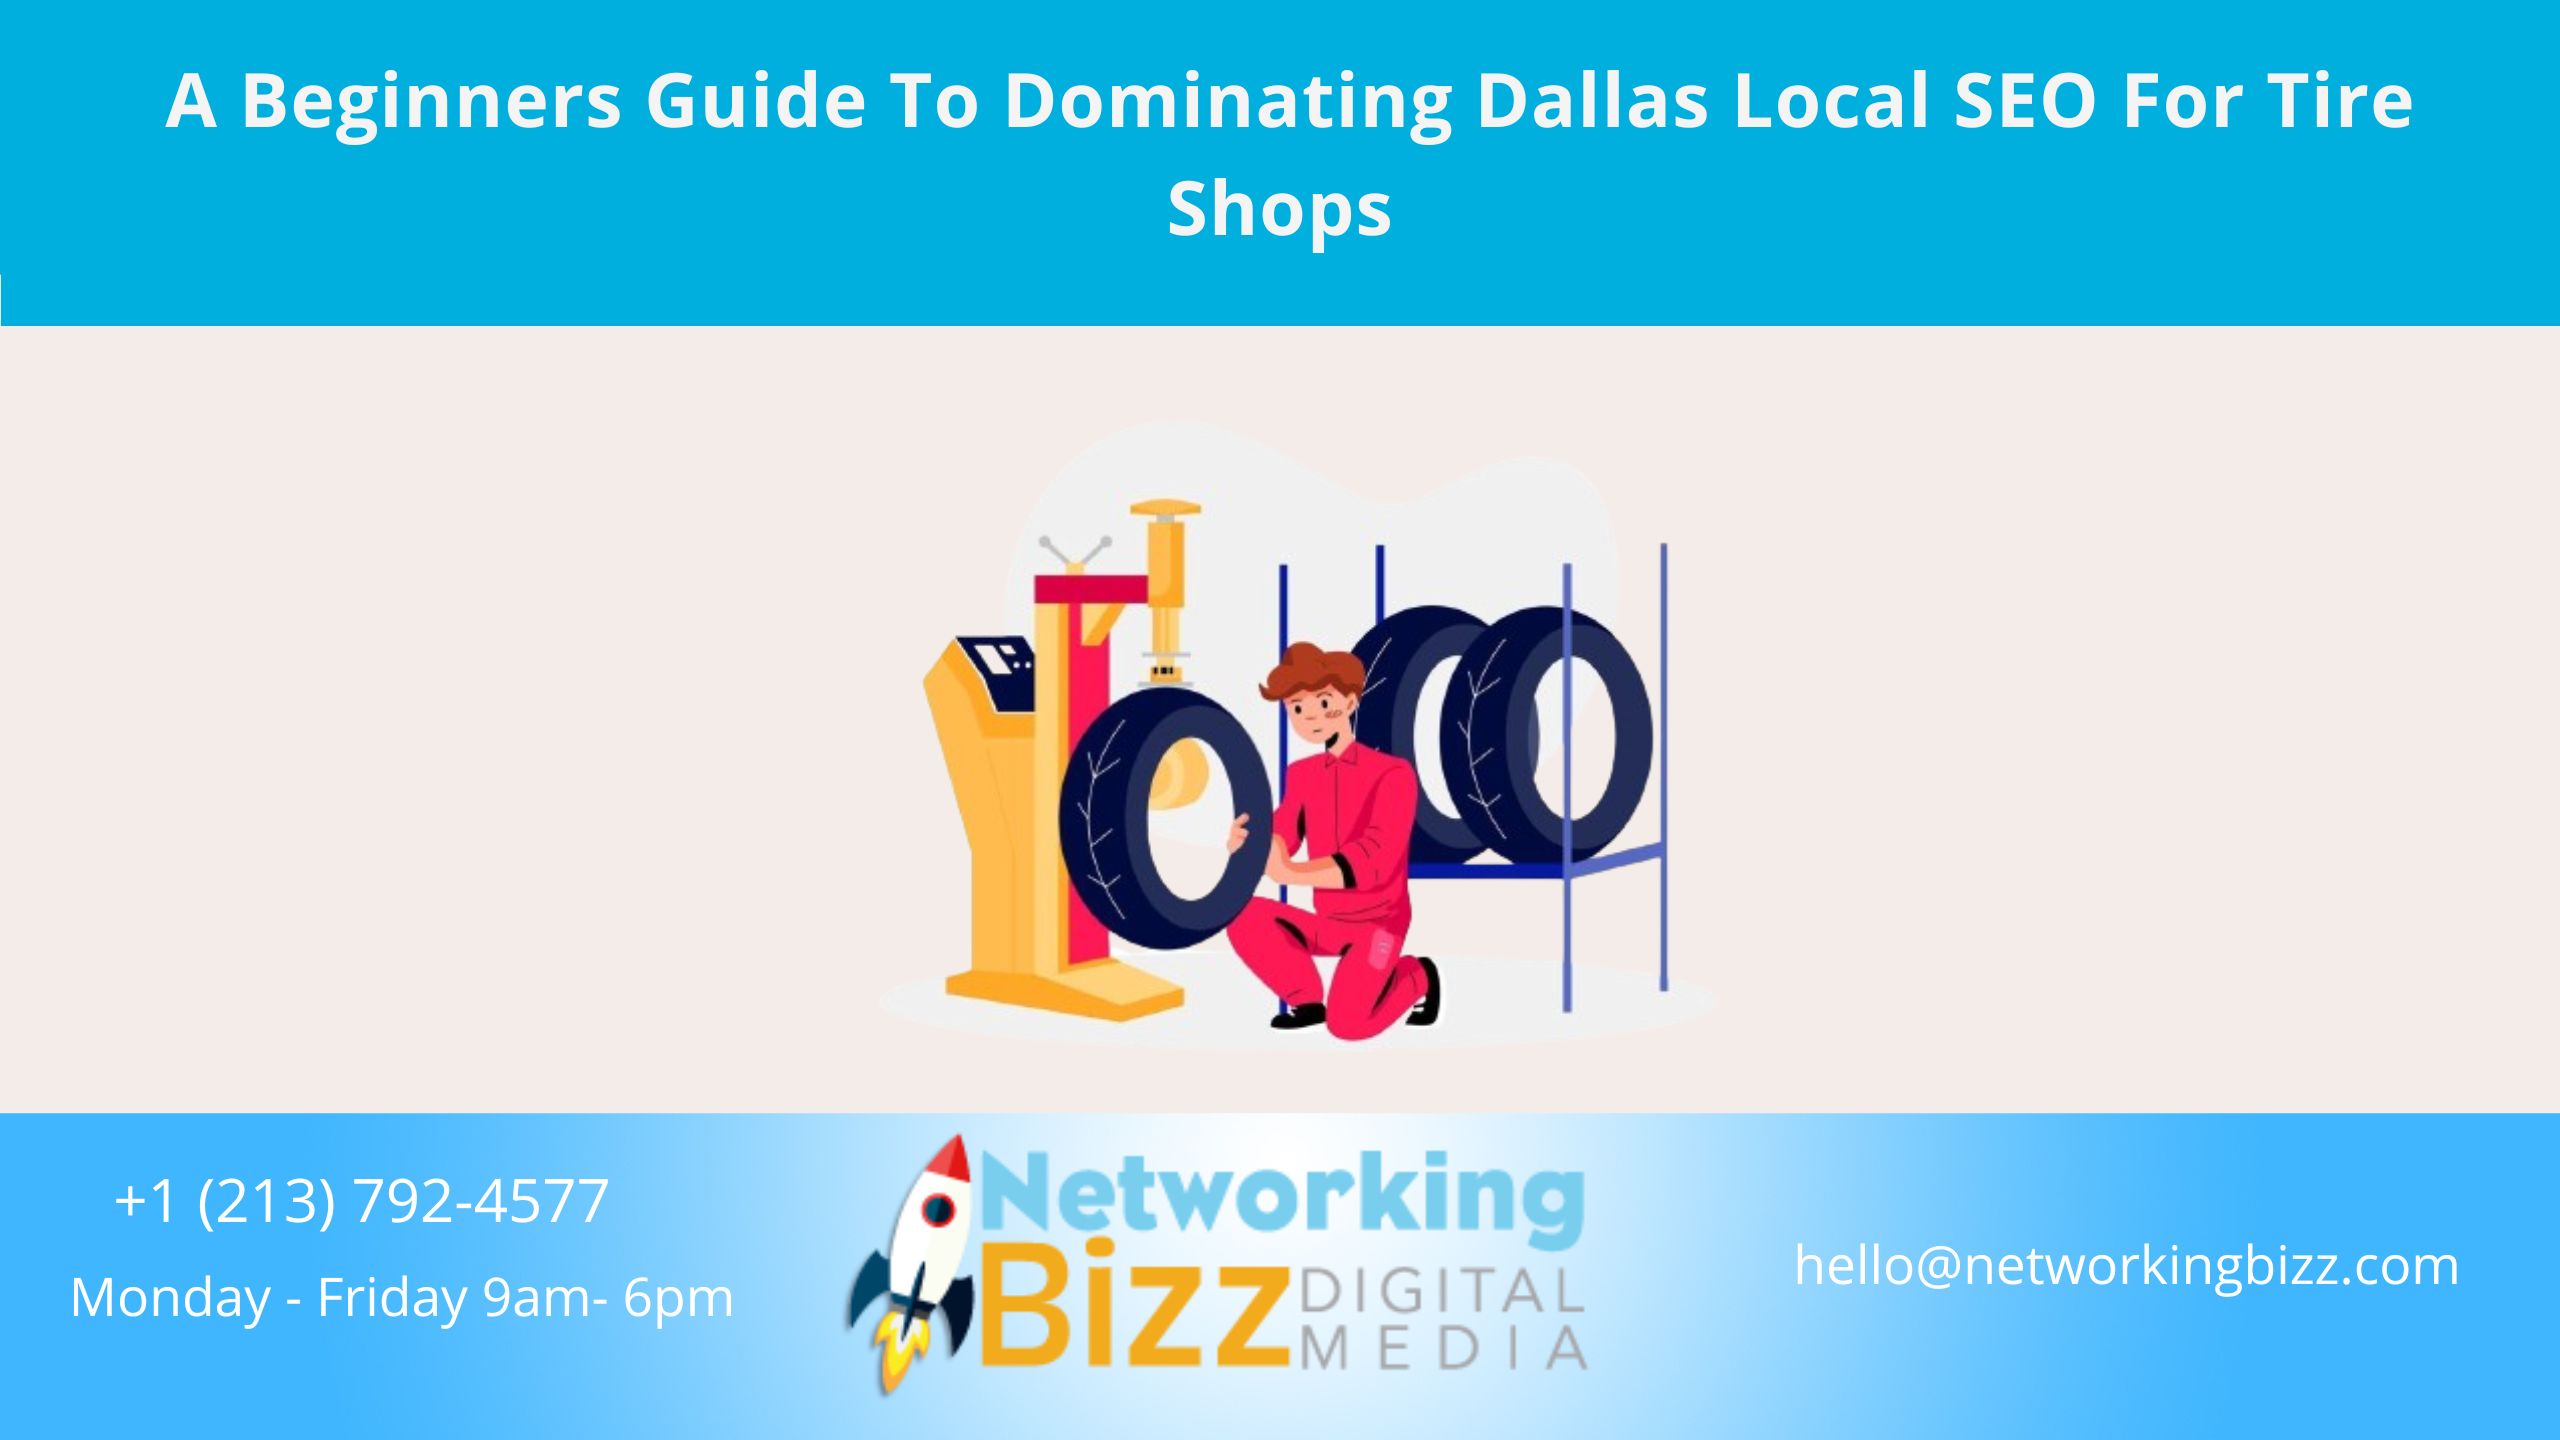  A Beginners Guide To Dominating Dallas Local SEO For Tire Shops